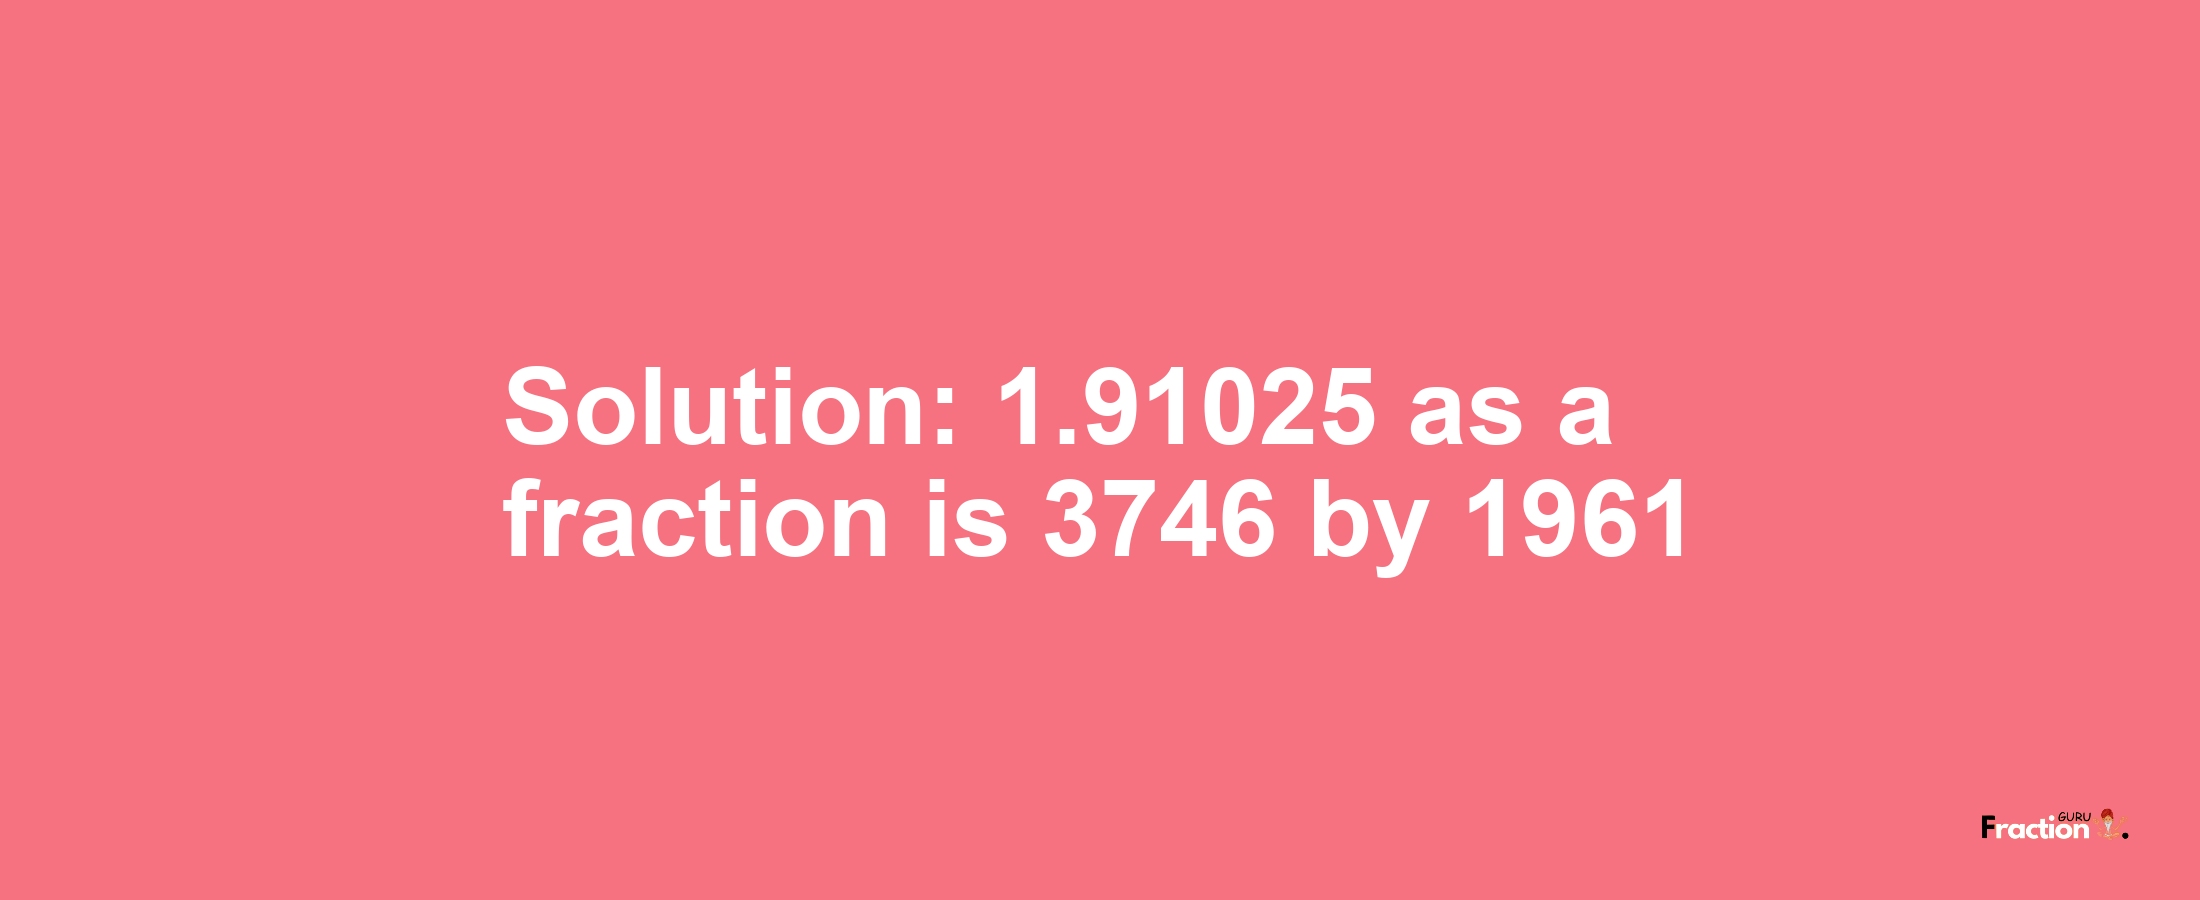 Solution:1.91025 as a fraction is 3746/1961